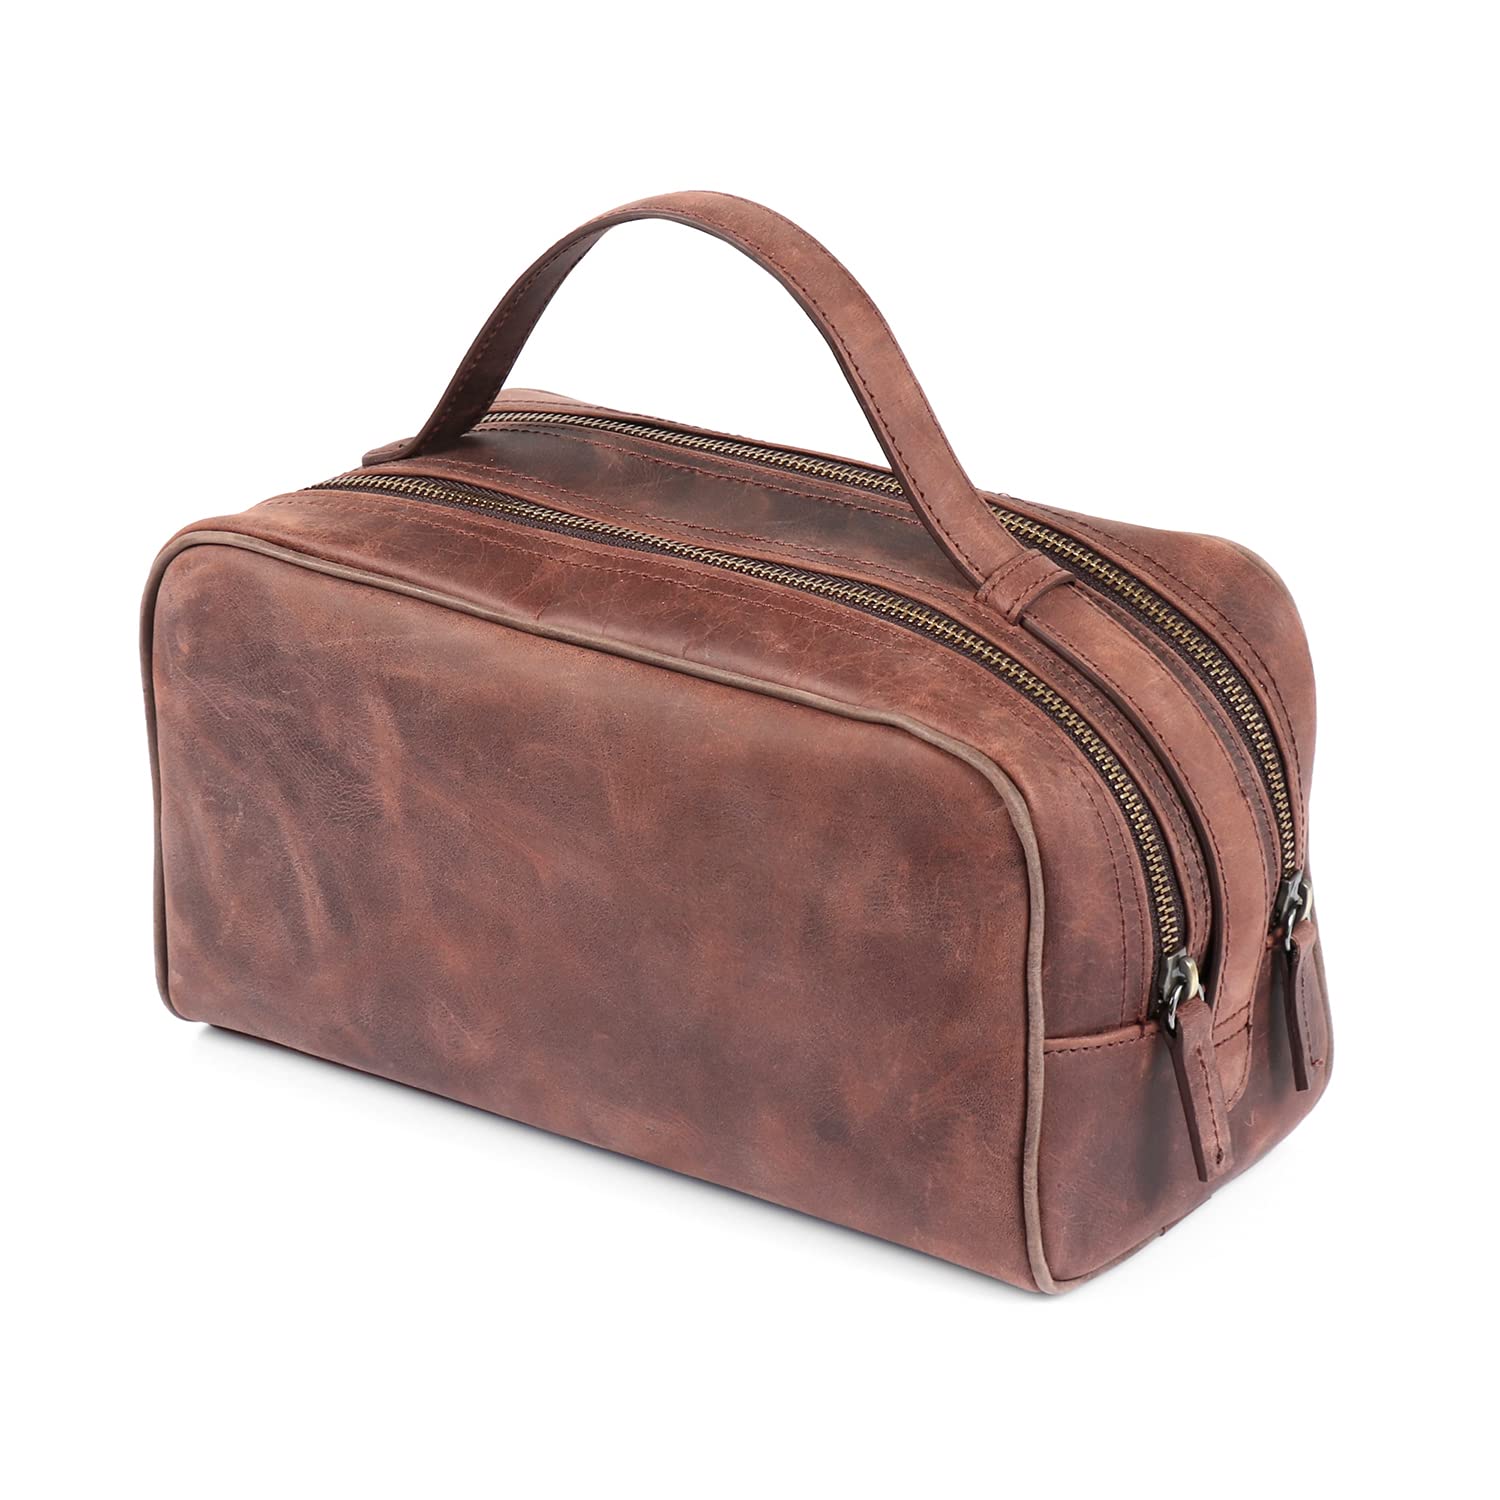 Londo Two Compartment Genuine Leather Travel Bag - Unisex (Brown)